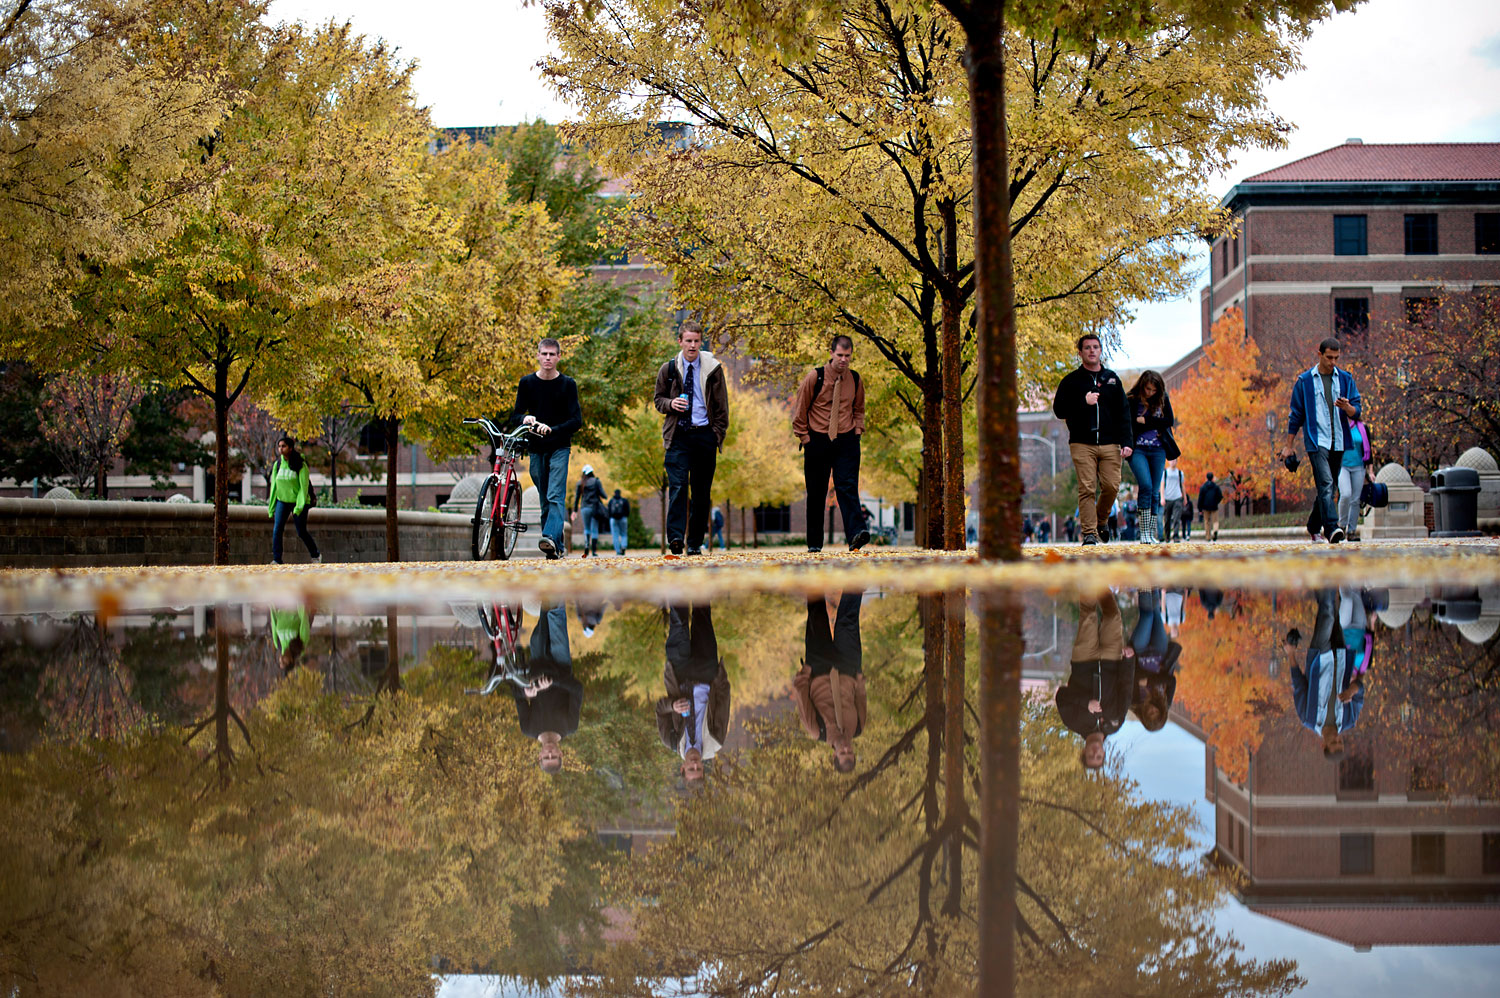 Students walk on the Purdue Mall on the campus of Purdue University in West Lafayette, Indiana, Oct. 22, 2012. (Daniel Acker—Bloomberg/Getty Images)